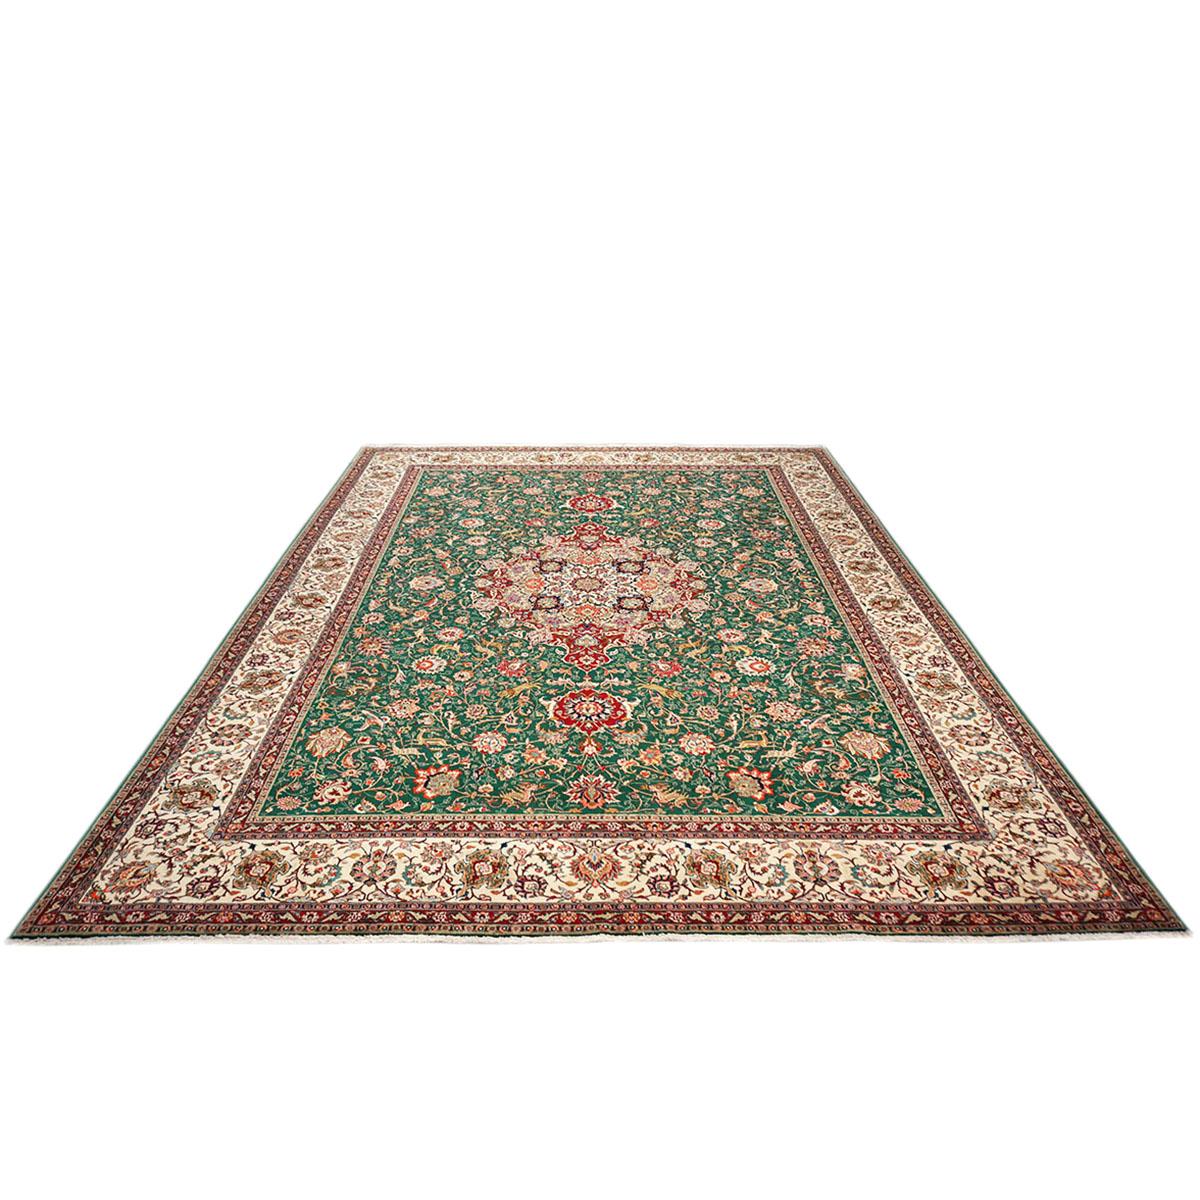 Ashly fine rugs presents a 1940s Antique Persian Tabriz. Tabriz is a northern city in modern-day Iran and has forever been famous for the fineness and craftsmanship of its handmade rugs. This piece has a green-colored background, with the design,